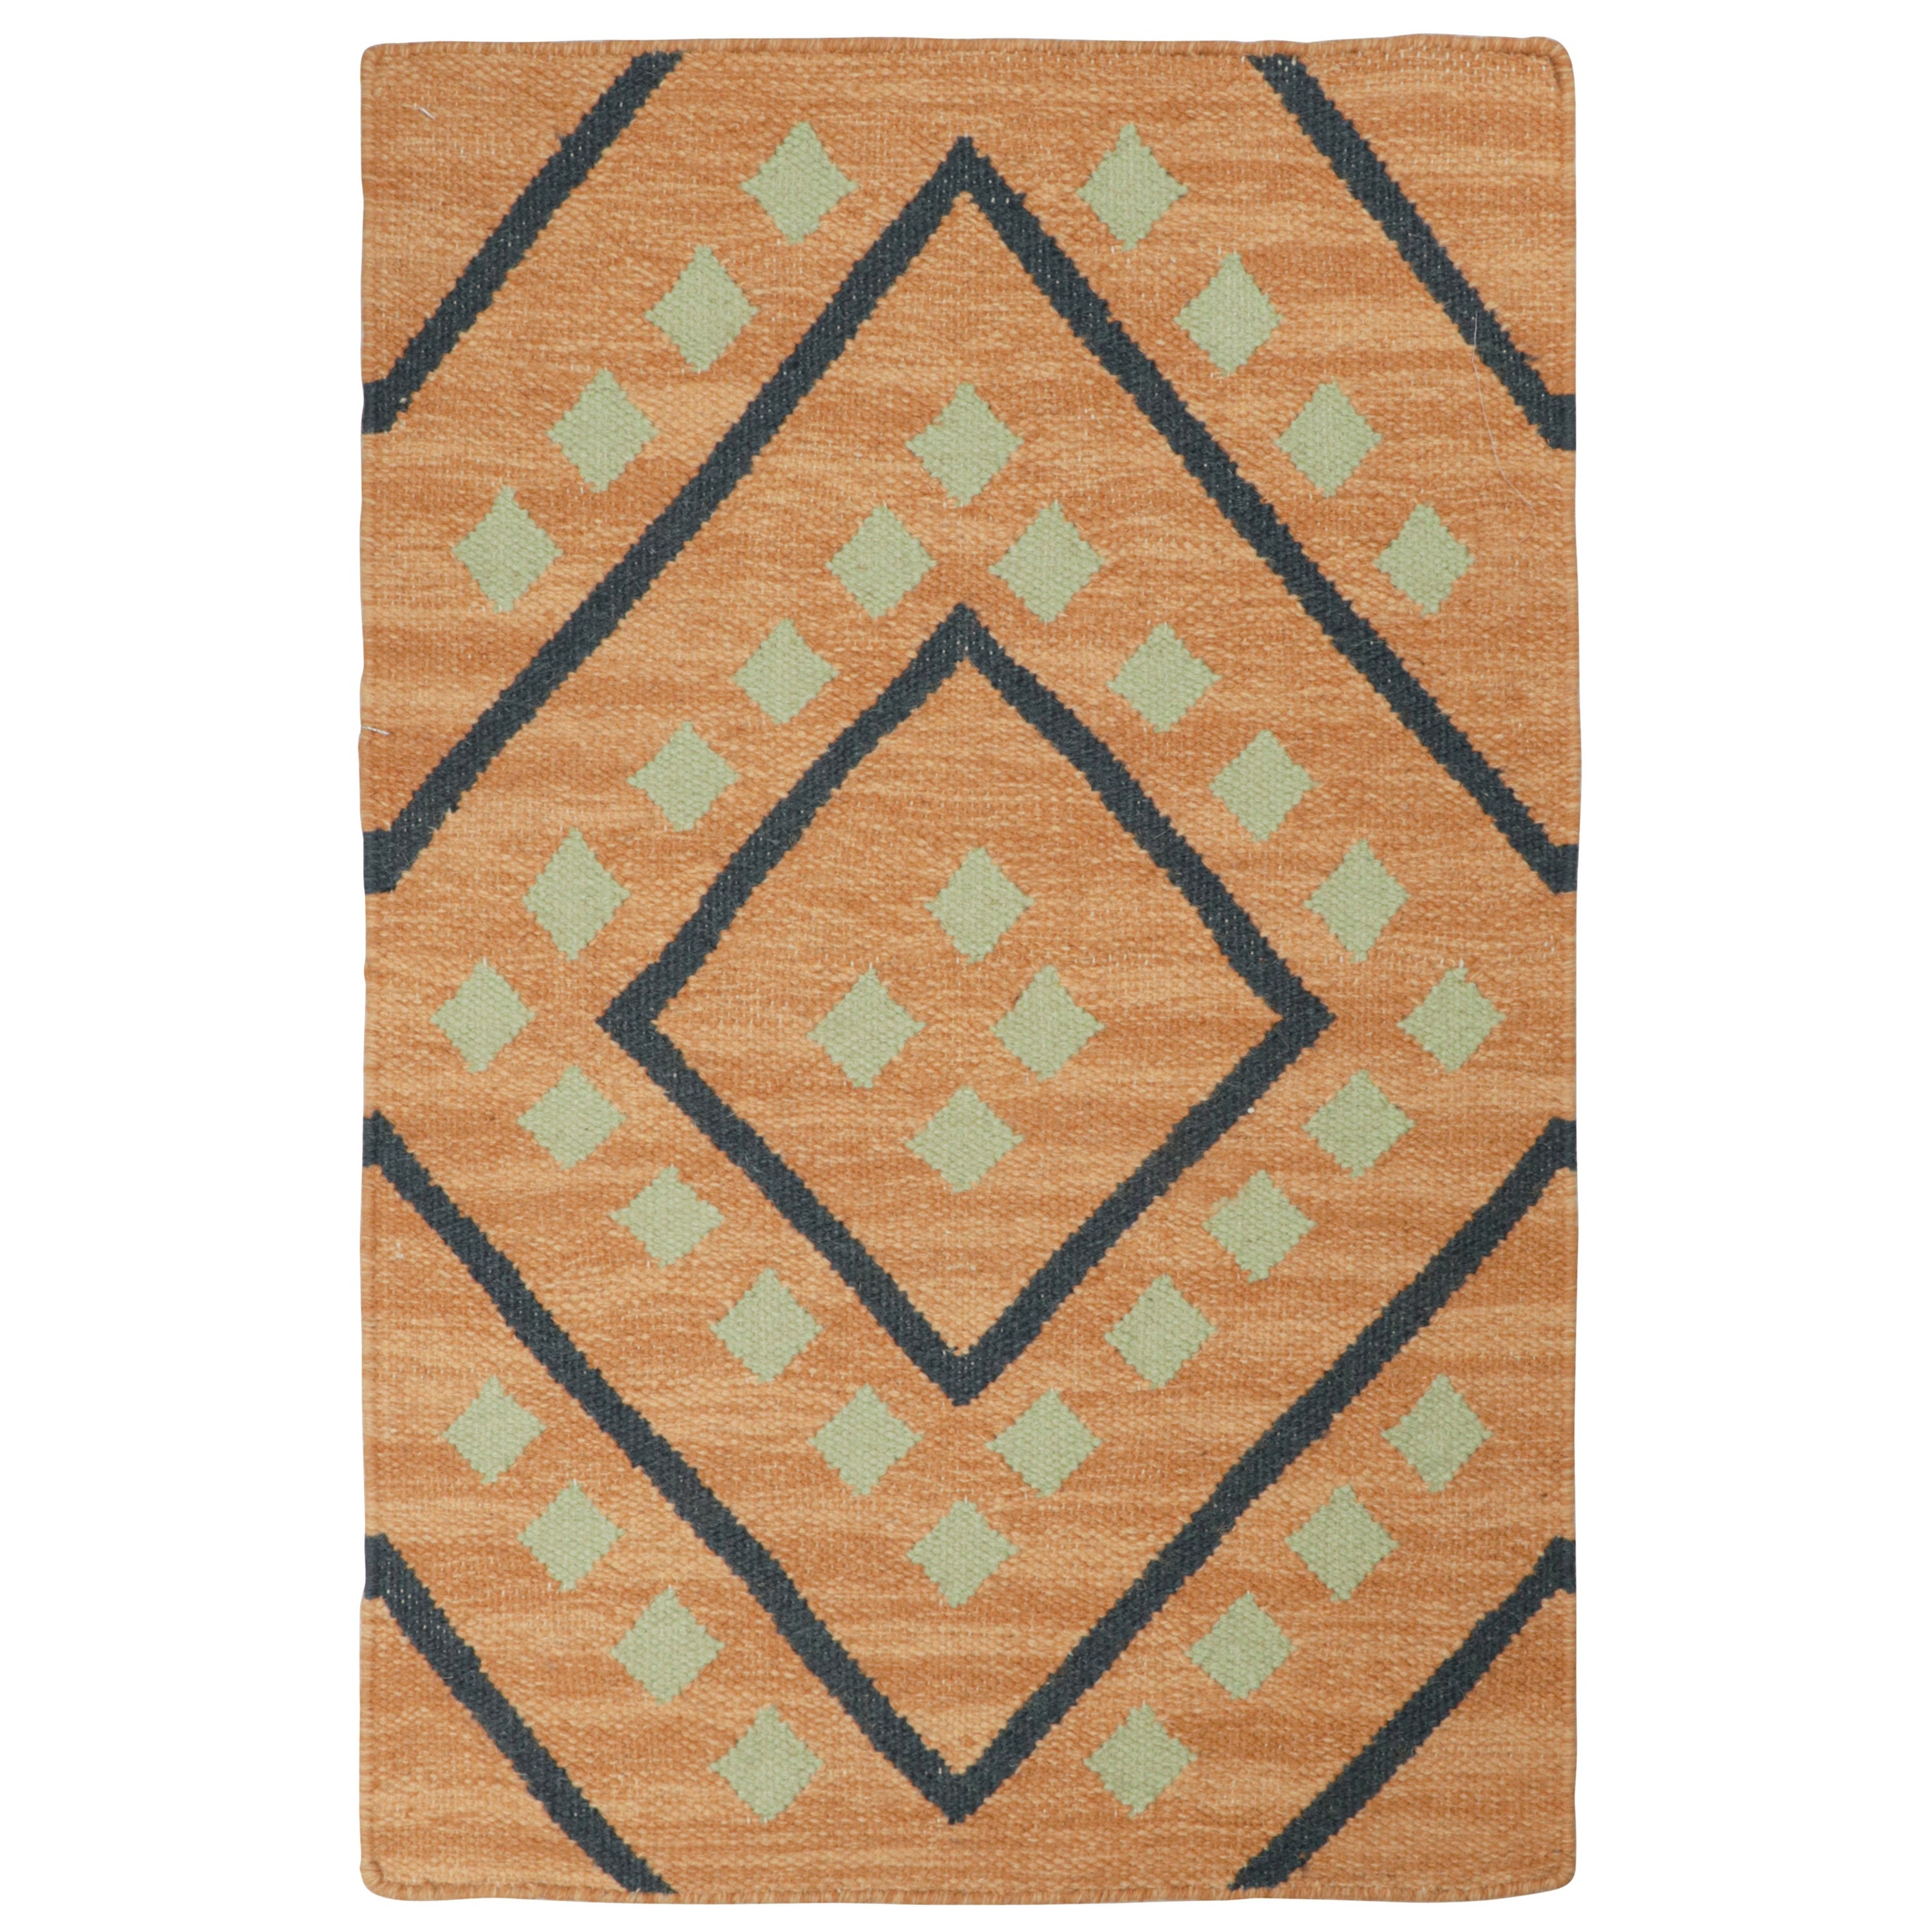 Rug & Kilim’s Tribal style Kilim in Gold with Black & Green Patterns For Sale